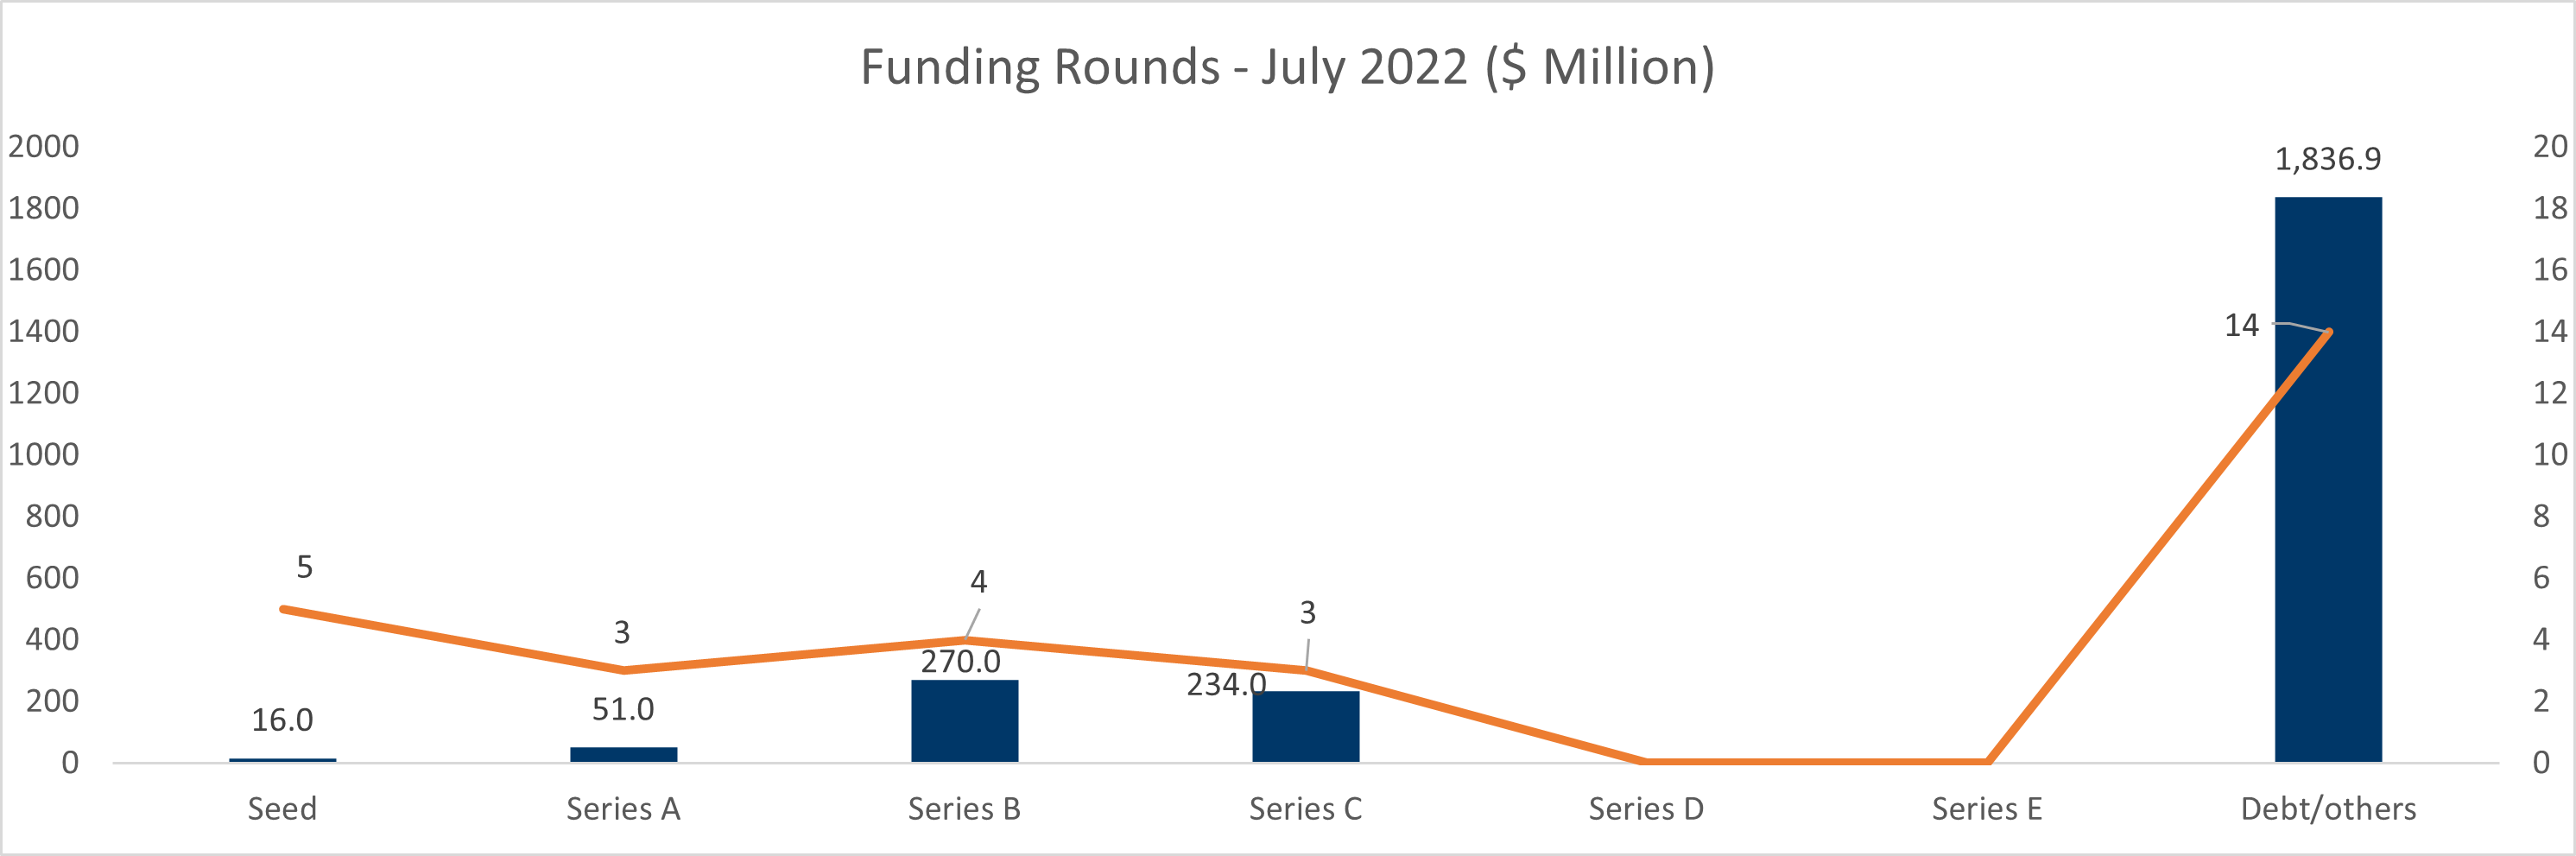 Funding rounds - July 2022